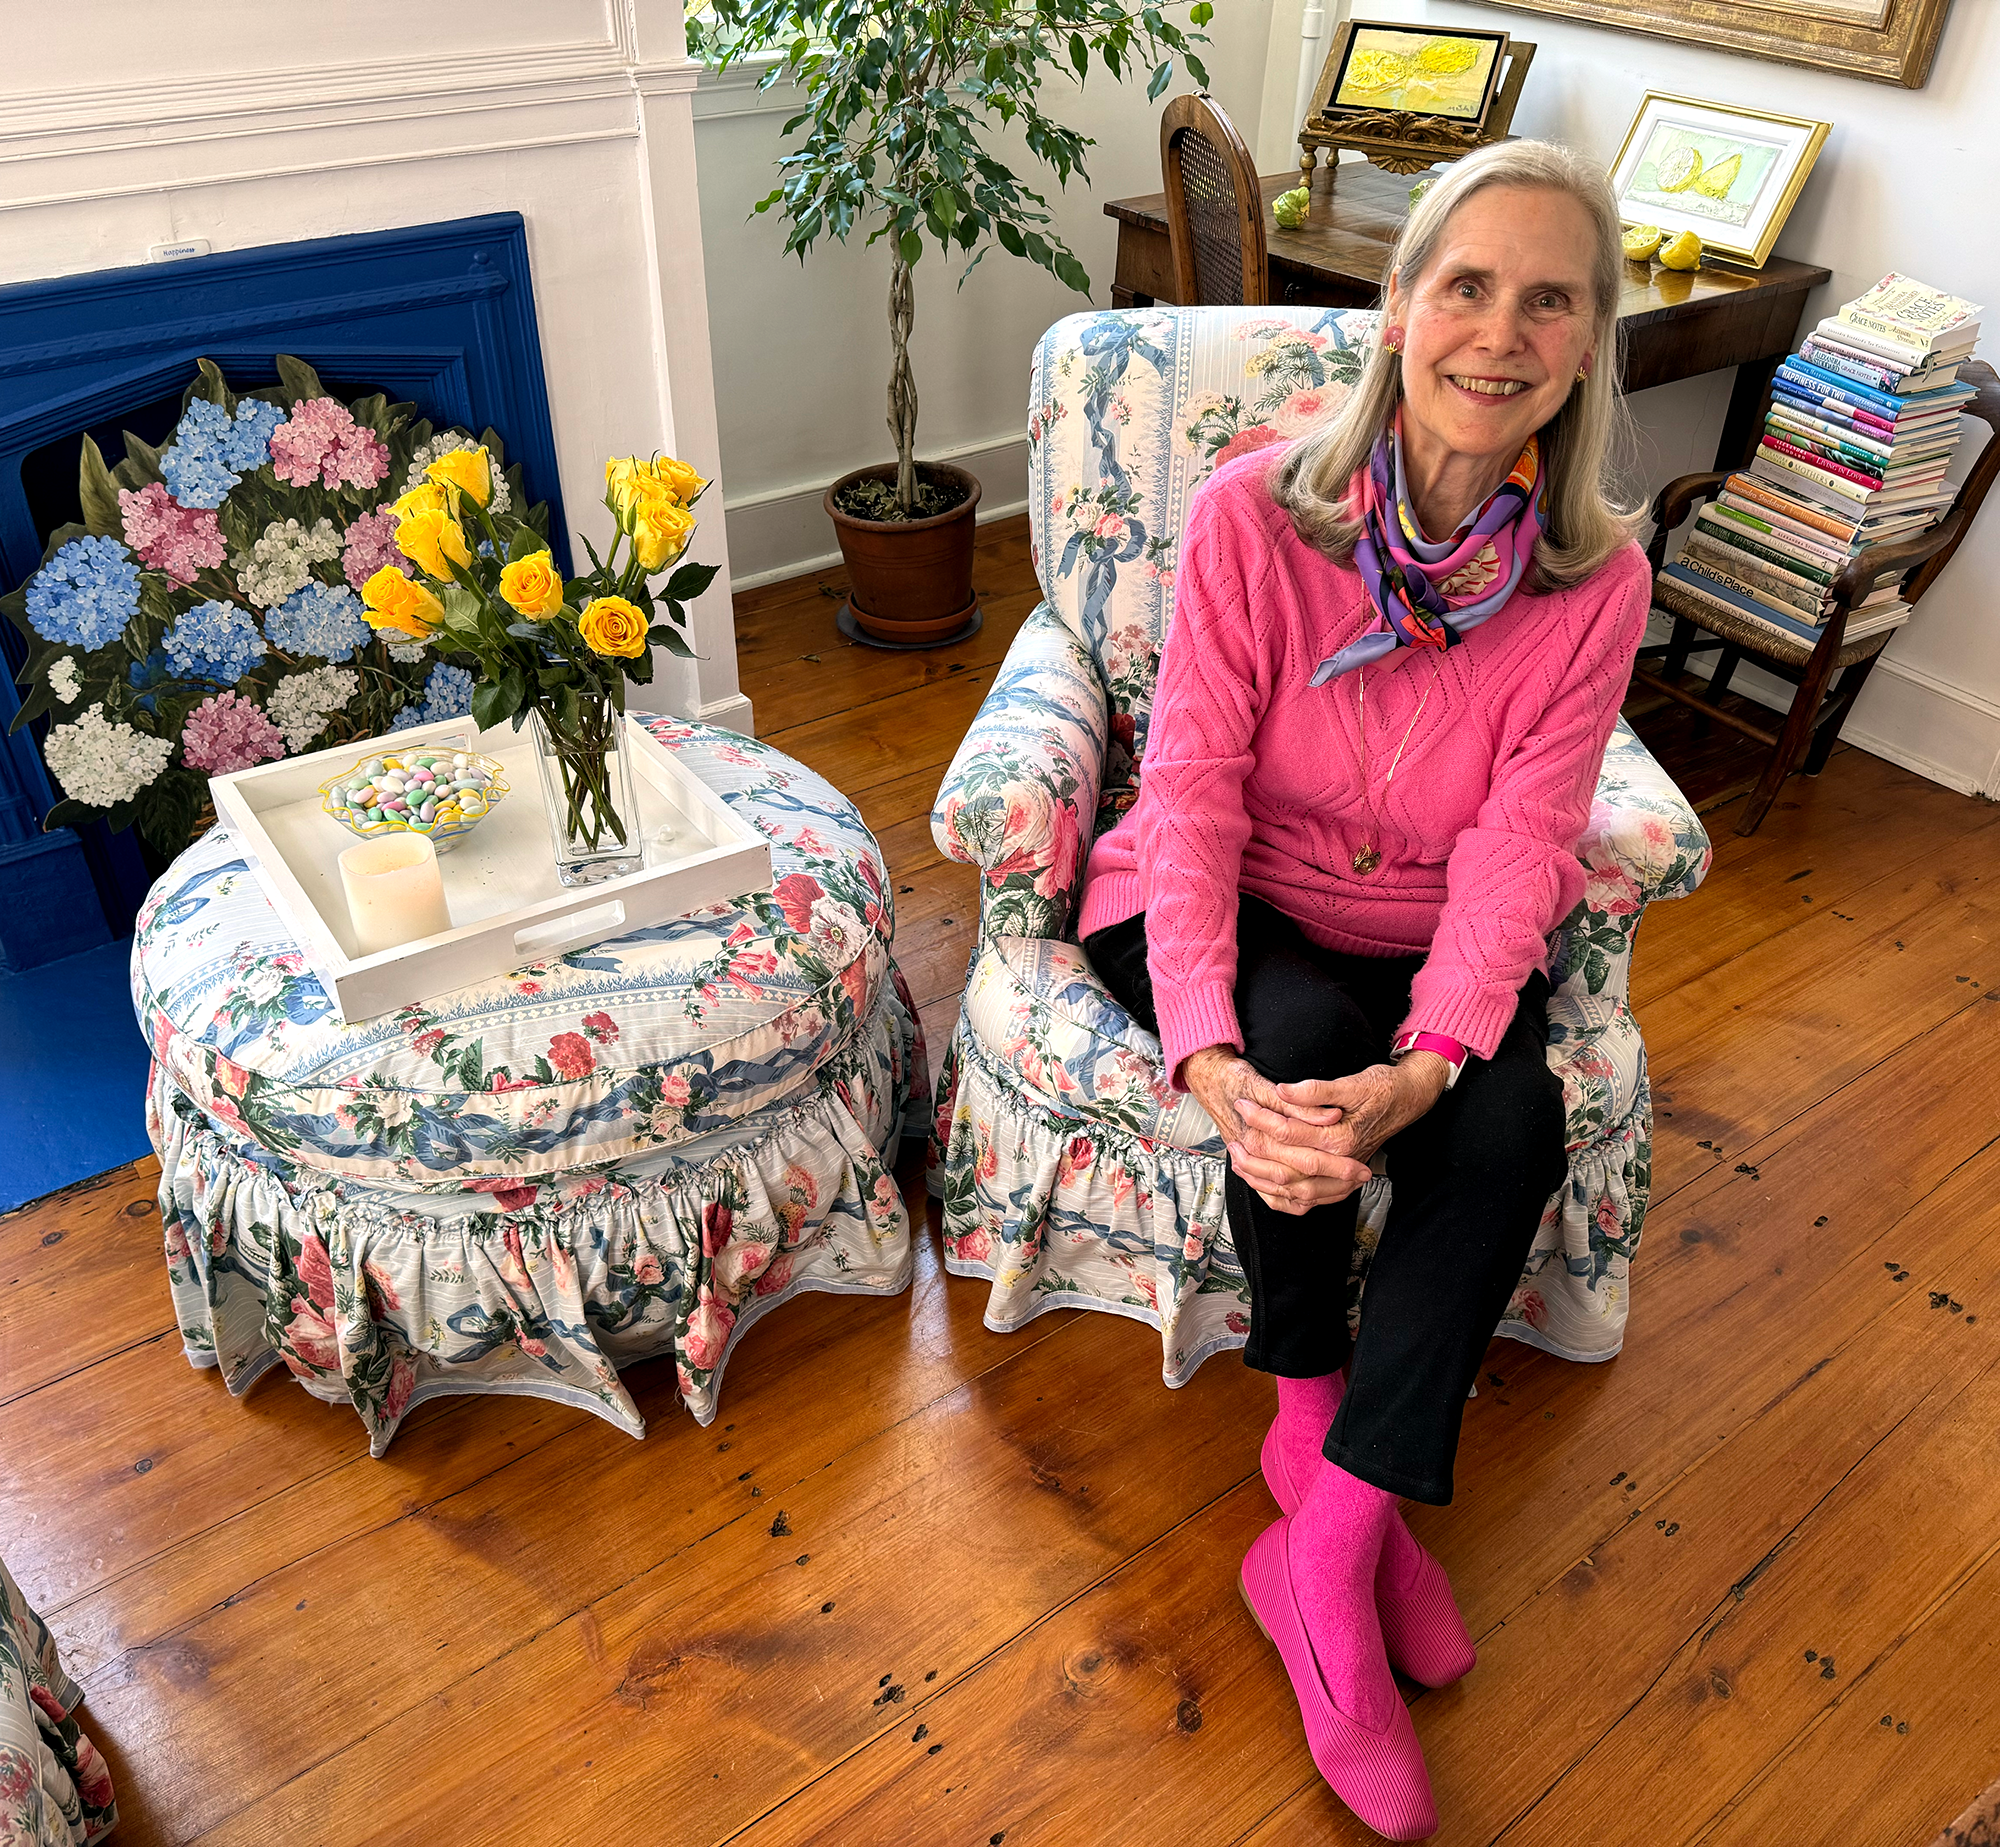 Alexandra in a chair wearing a bright pink sweater, bright pink socks and bright pink shoes